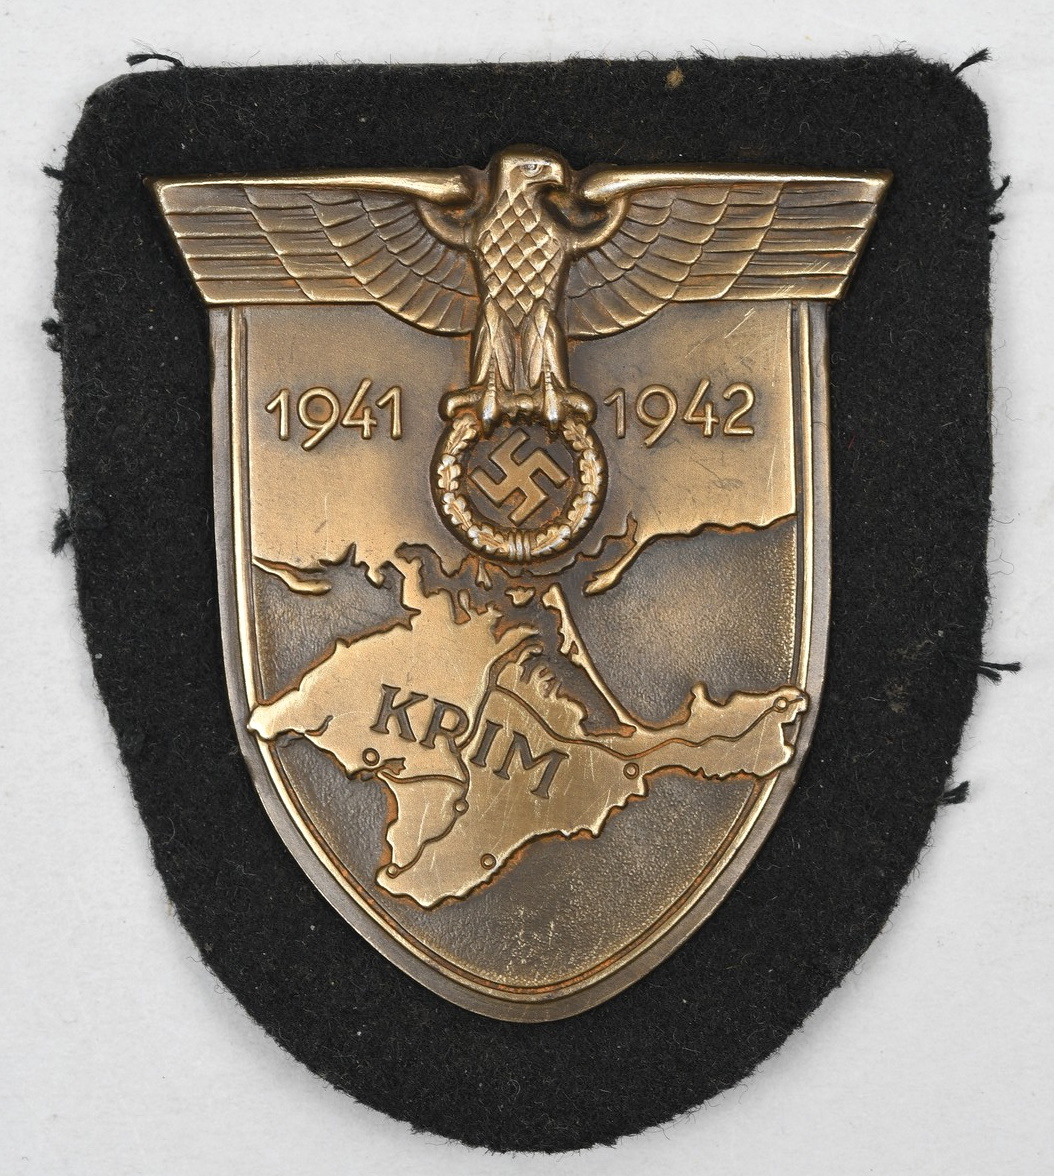 KRIM Campaign Shield awarded to a panzer soldier